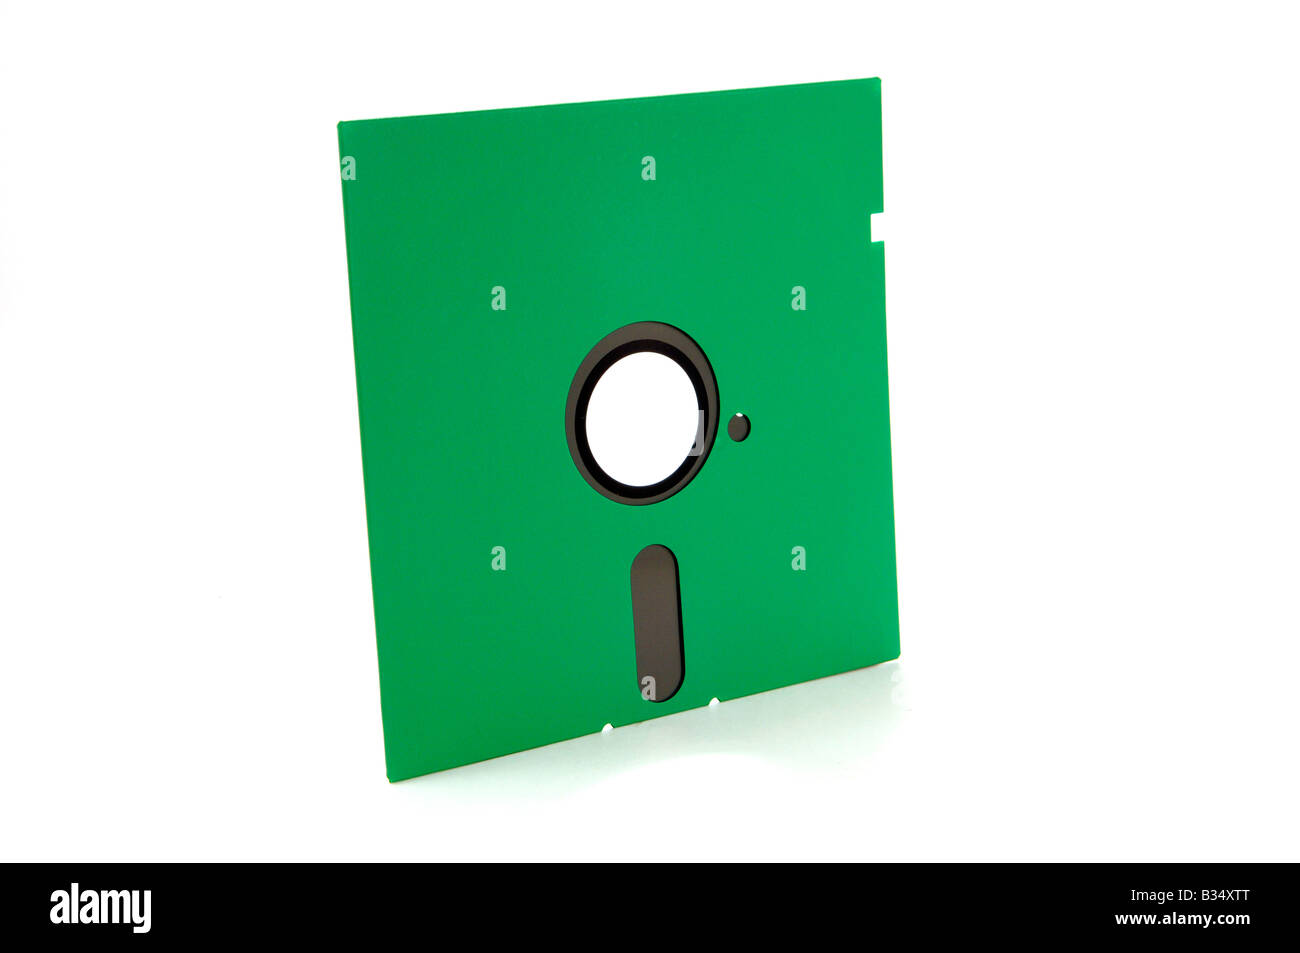 Floppy Disk 5 1 4 5 1 4 inch floppy disk from the 1980s Stock Photo - Alamy